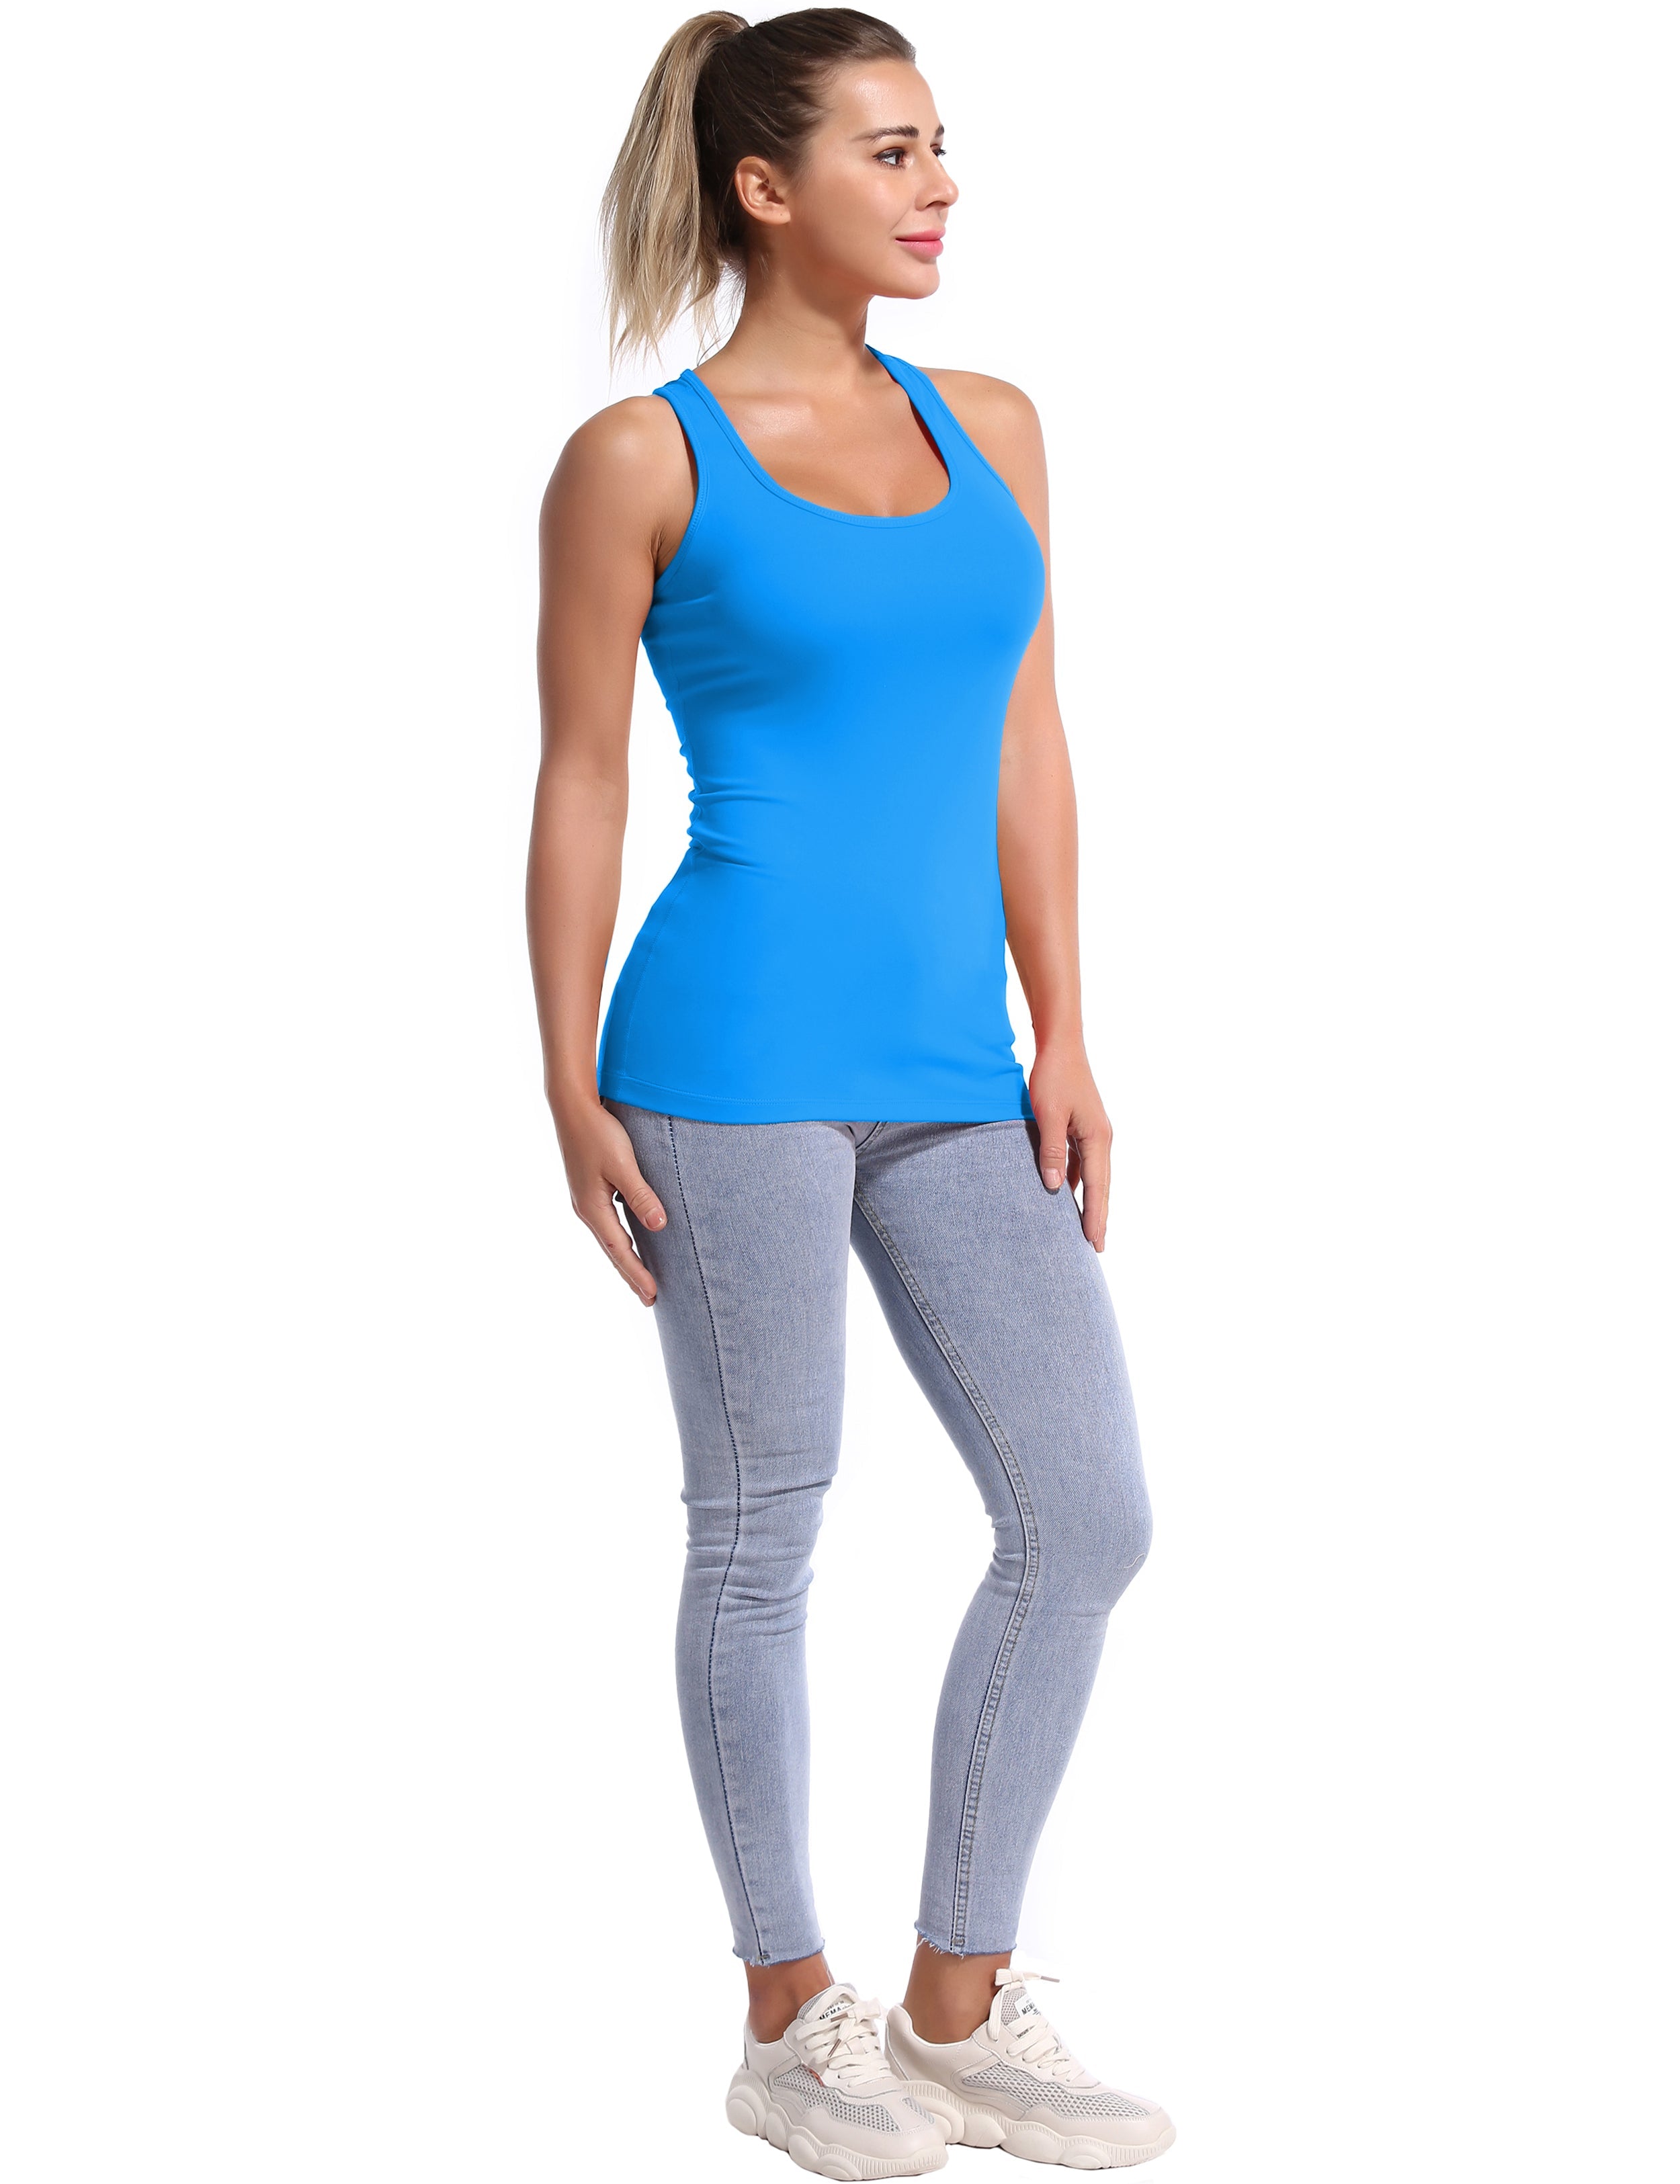 Racerback Athletic Tank Tops deepskyblue 92%Nylon/8%Spandex(Cotton Soft) Designed for Yoga Tight Fit So buttery soft, it feels weightless Sweat-wicking Four-way stretch Breathable Contours your body Sits below the waistband for moderate, everyday coverage